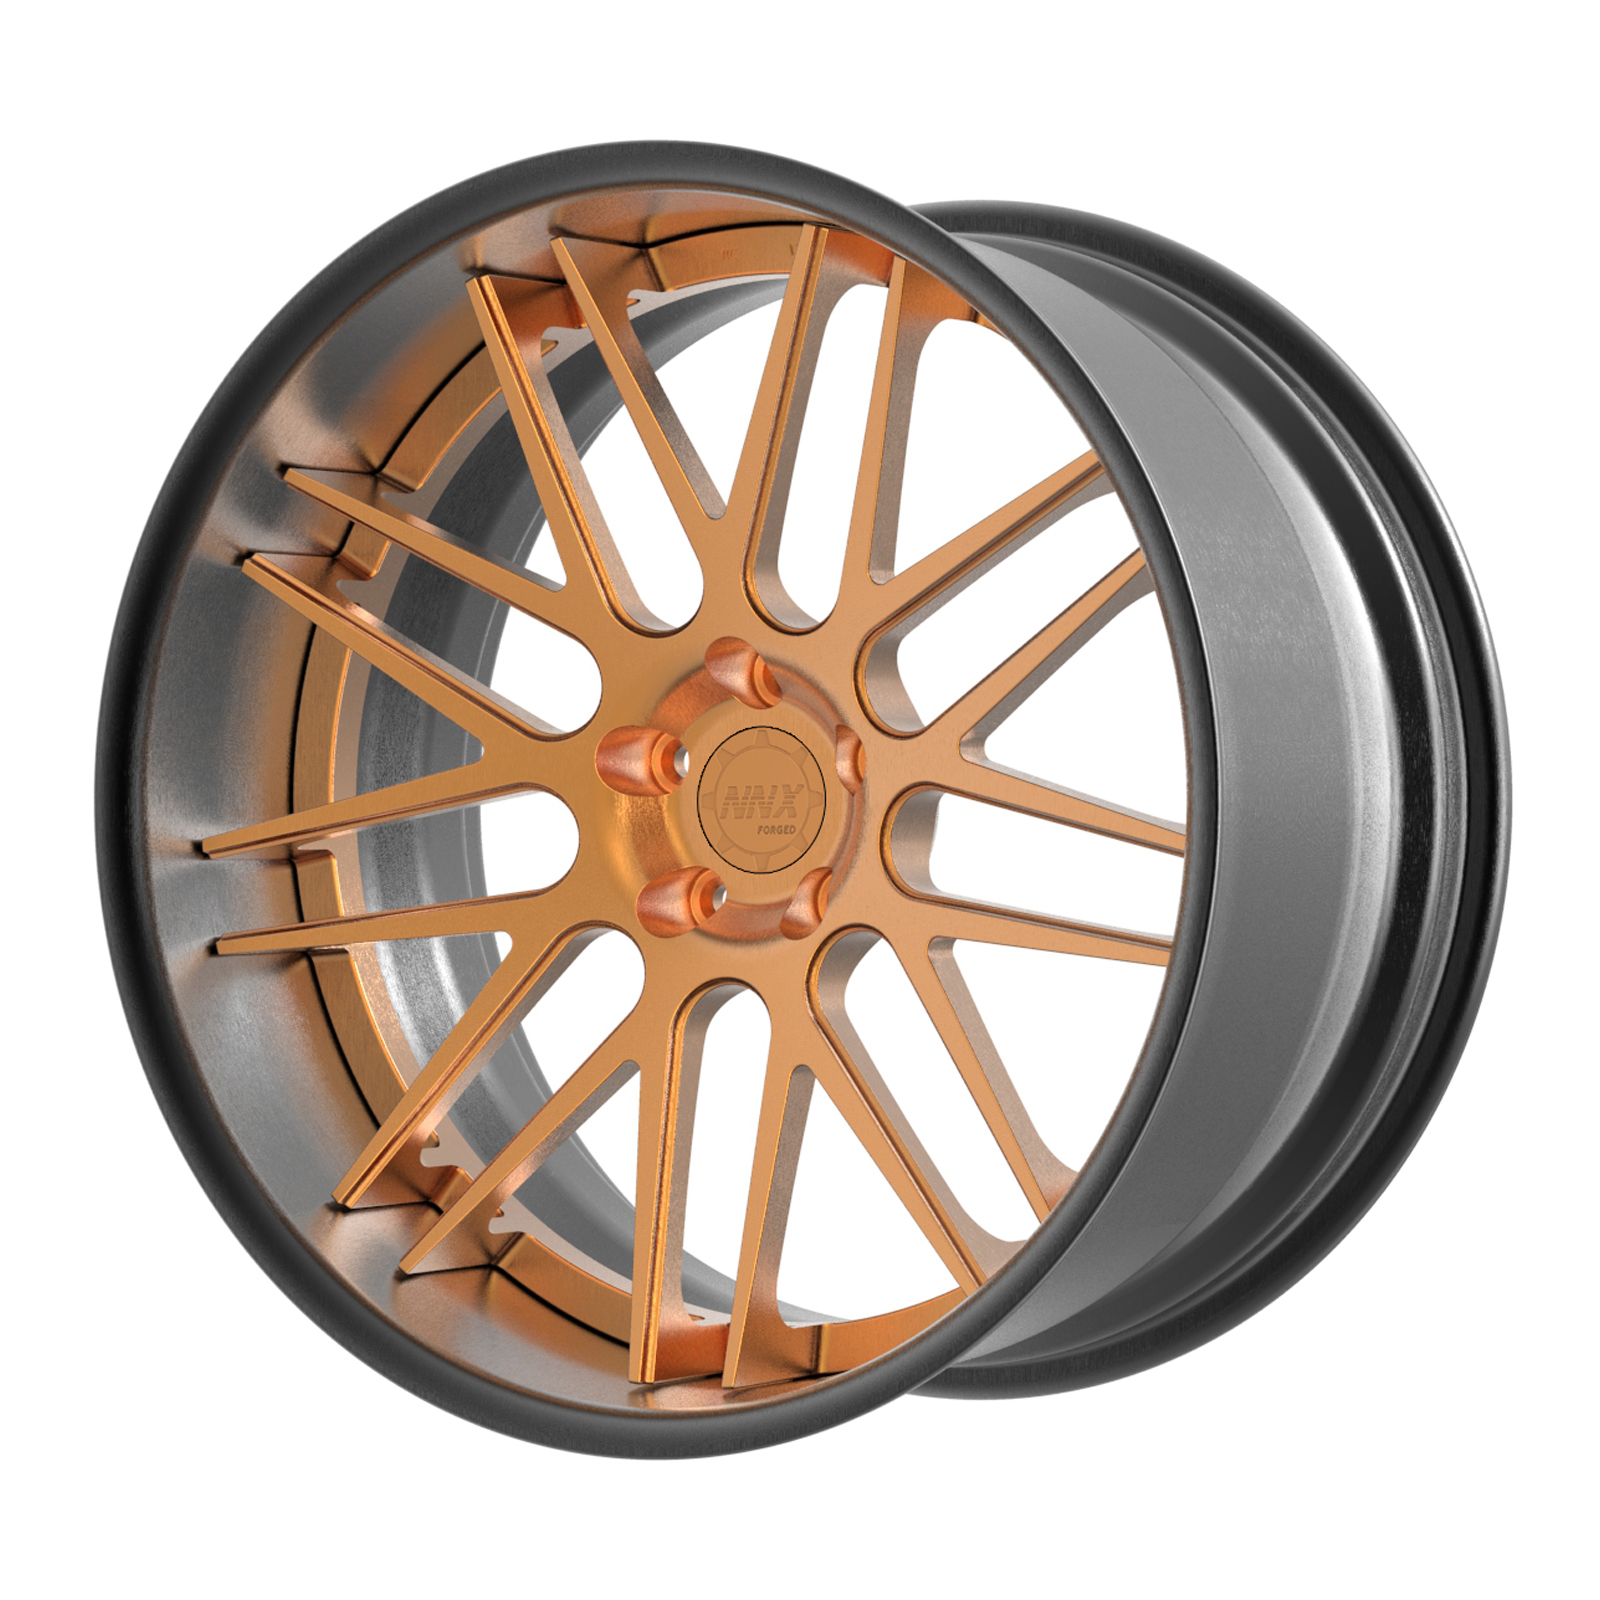 NNX-S125   OEM Supplier Sport Universal Staggered Mag Vehicle Auto Car Offset forged Rims Size 18 19 20 21 22 23 24  Inch